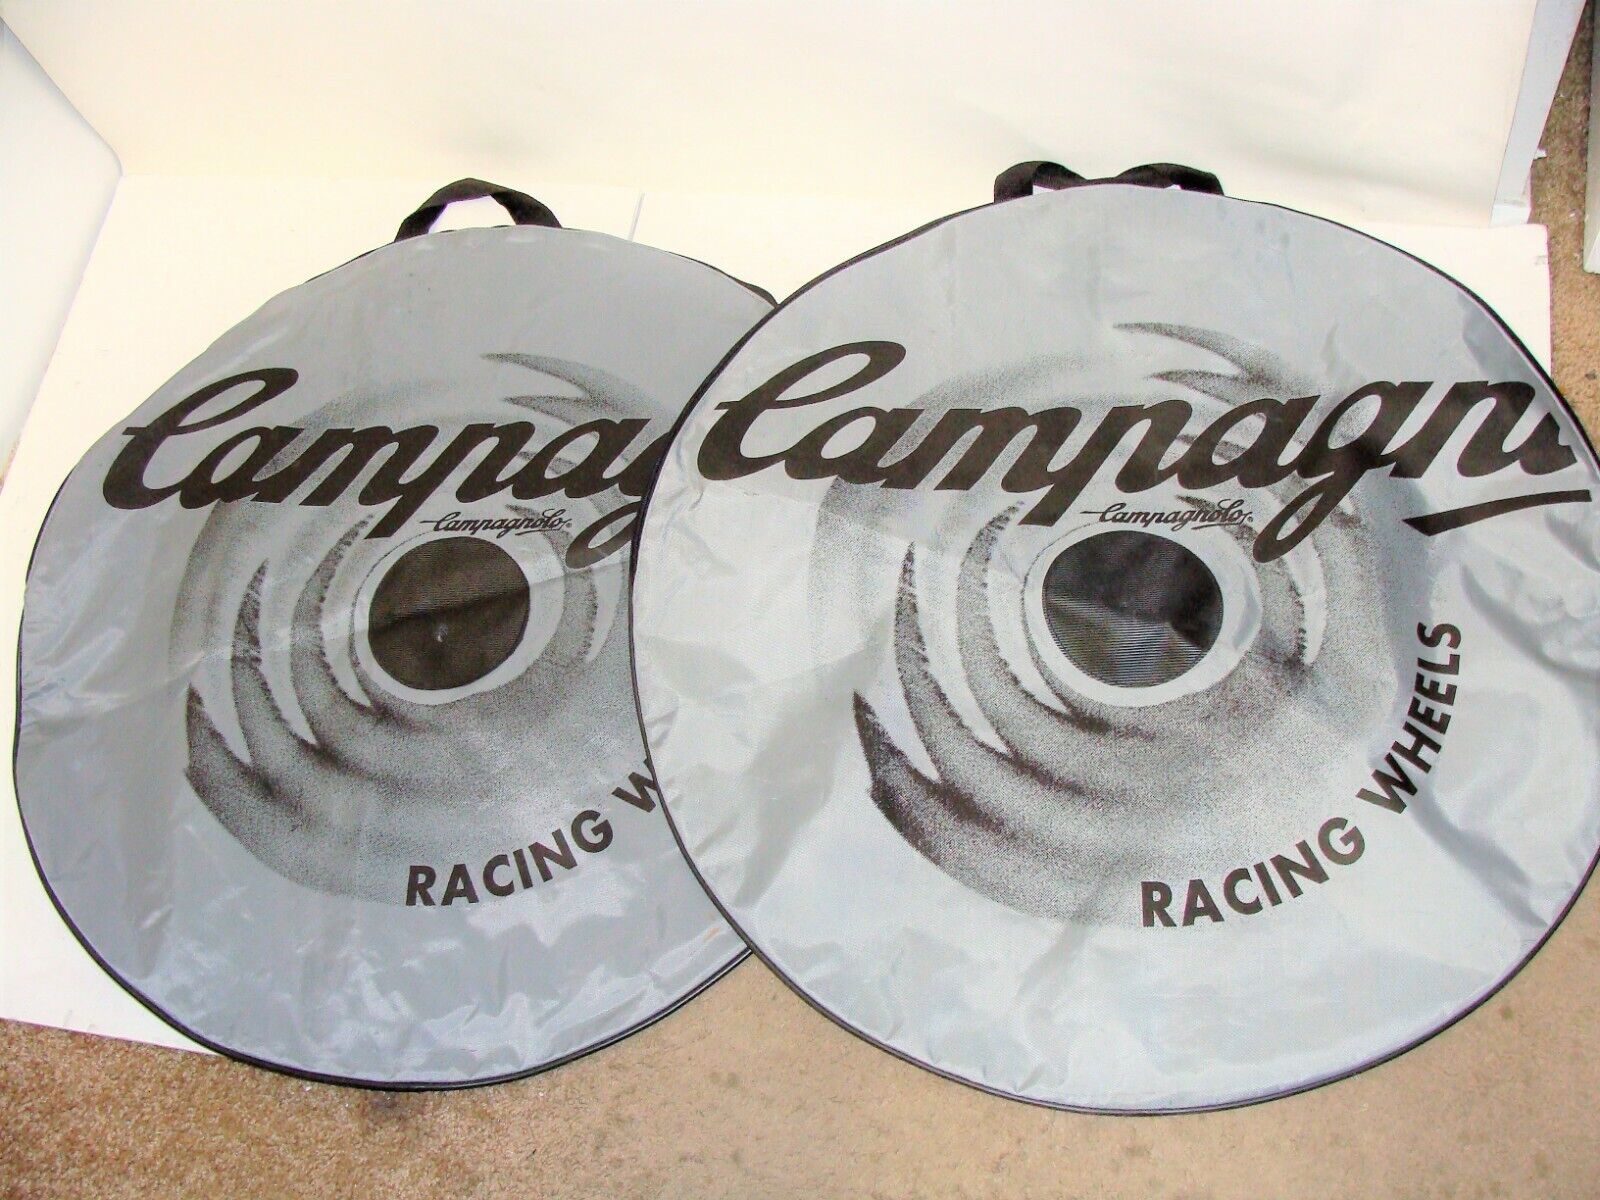 ~ Pair Of Campagnolo Racing Wheel Max 85% OFF Tire Zipper Covers Bag Now on sale Travel